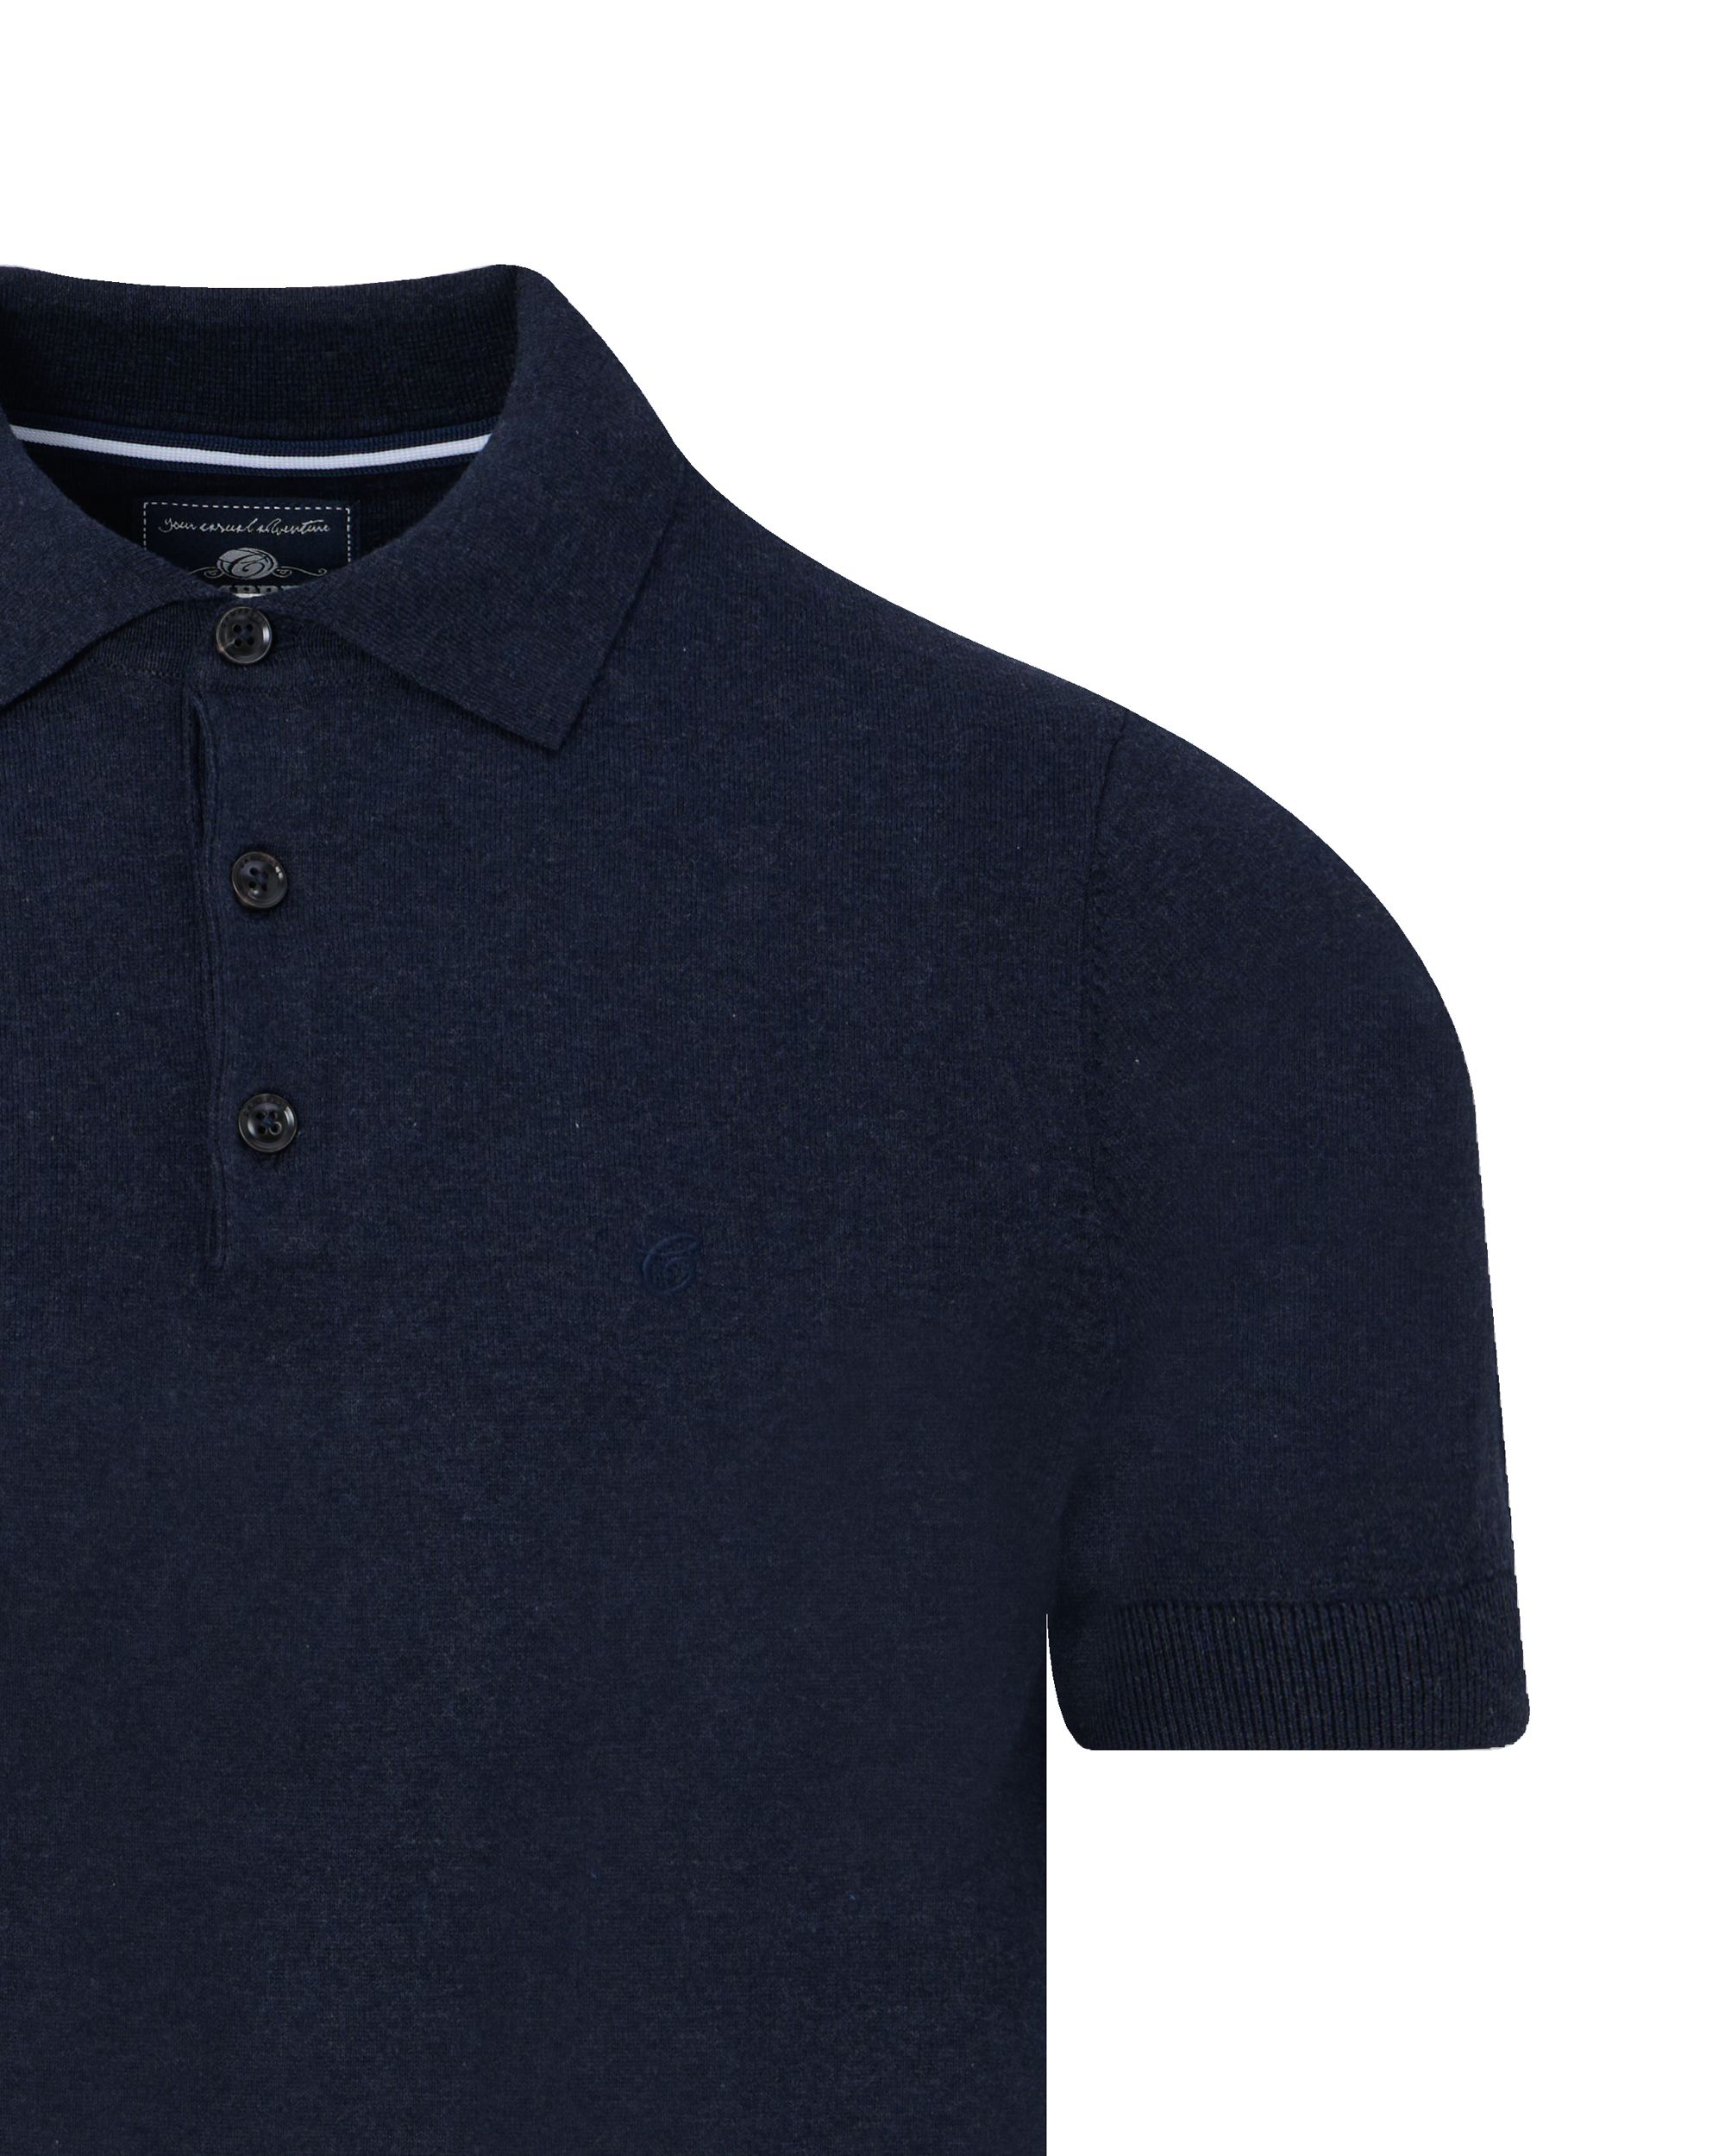 Campbell Classic Steed Polo KM Navy 090569-008-XXL